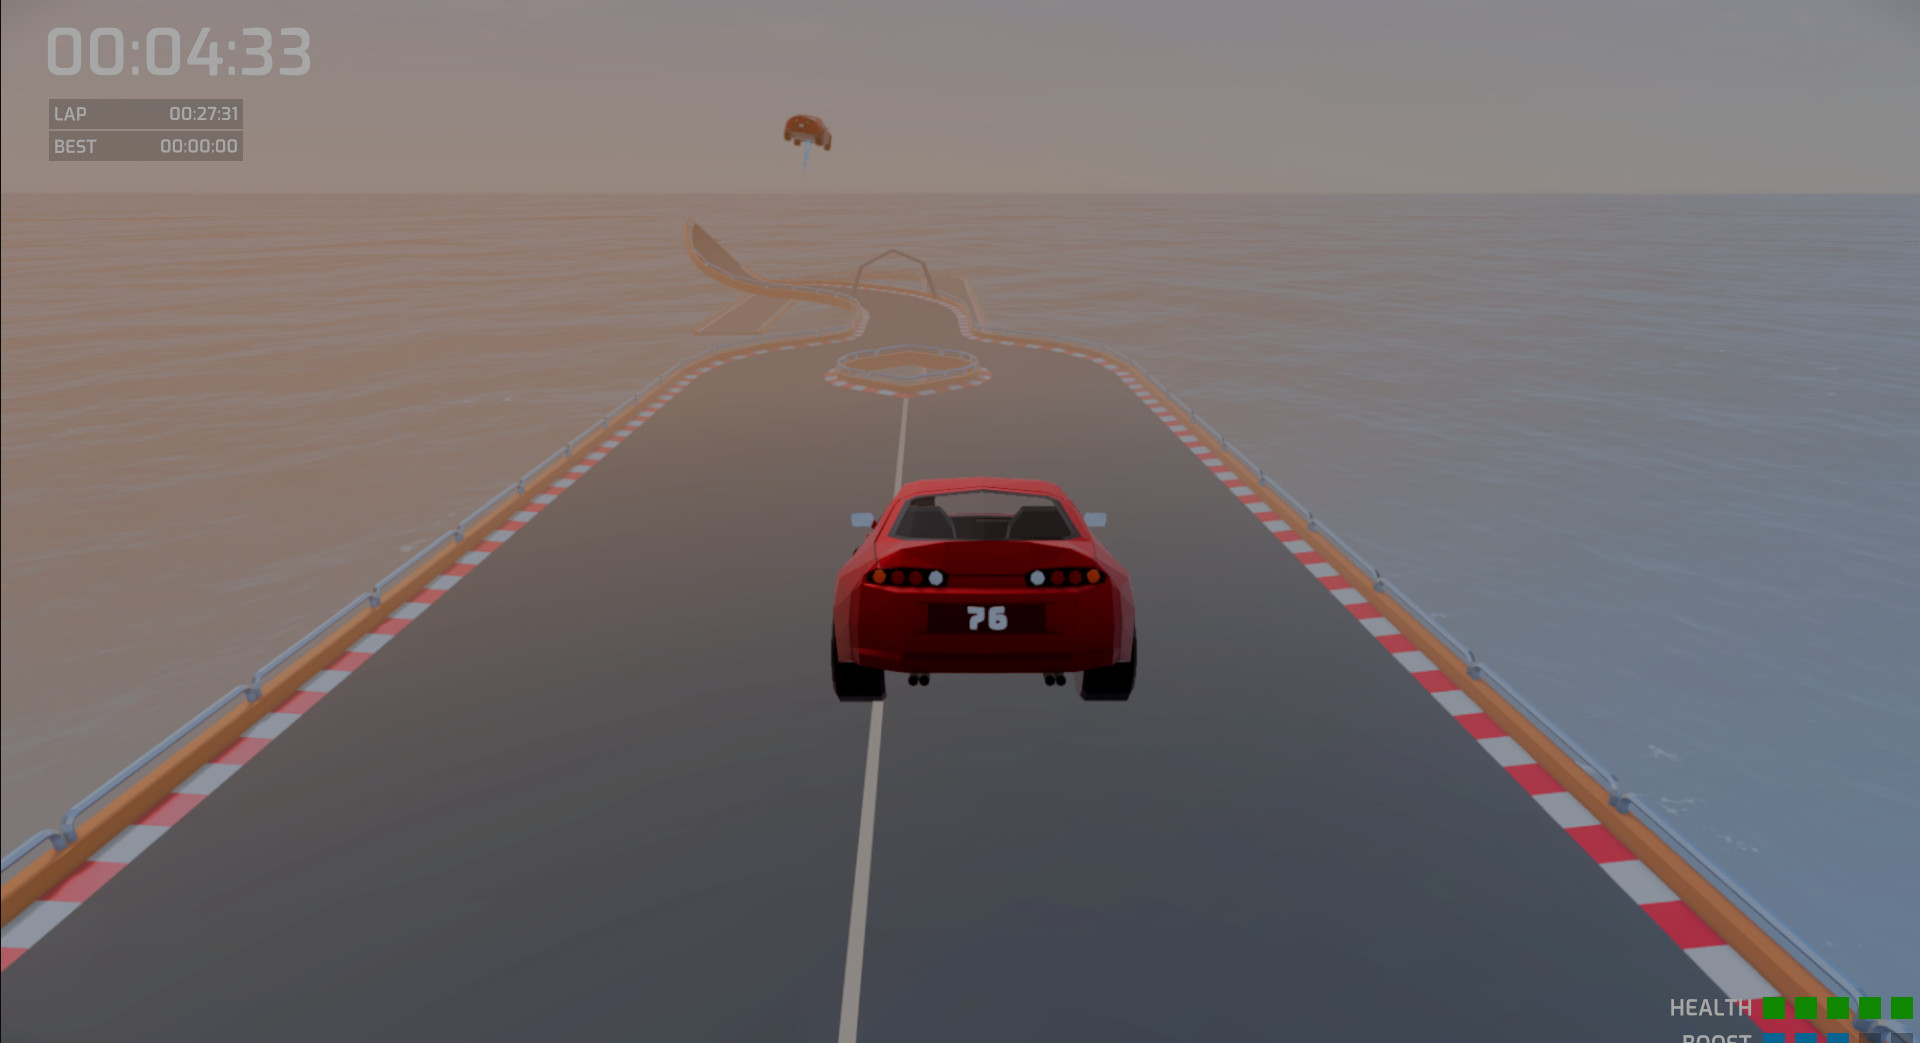 RELEASED] Racing Project Kit Openworld MP - Complete Racing Multiplayer  Project - Unity Forum